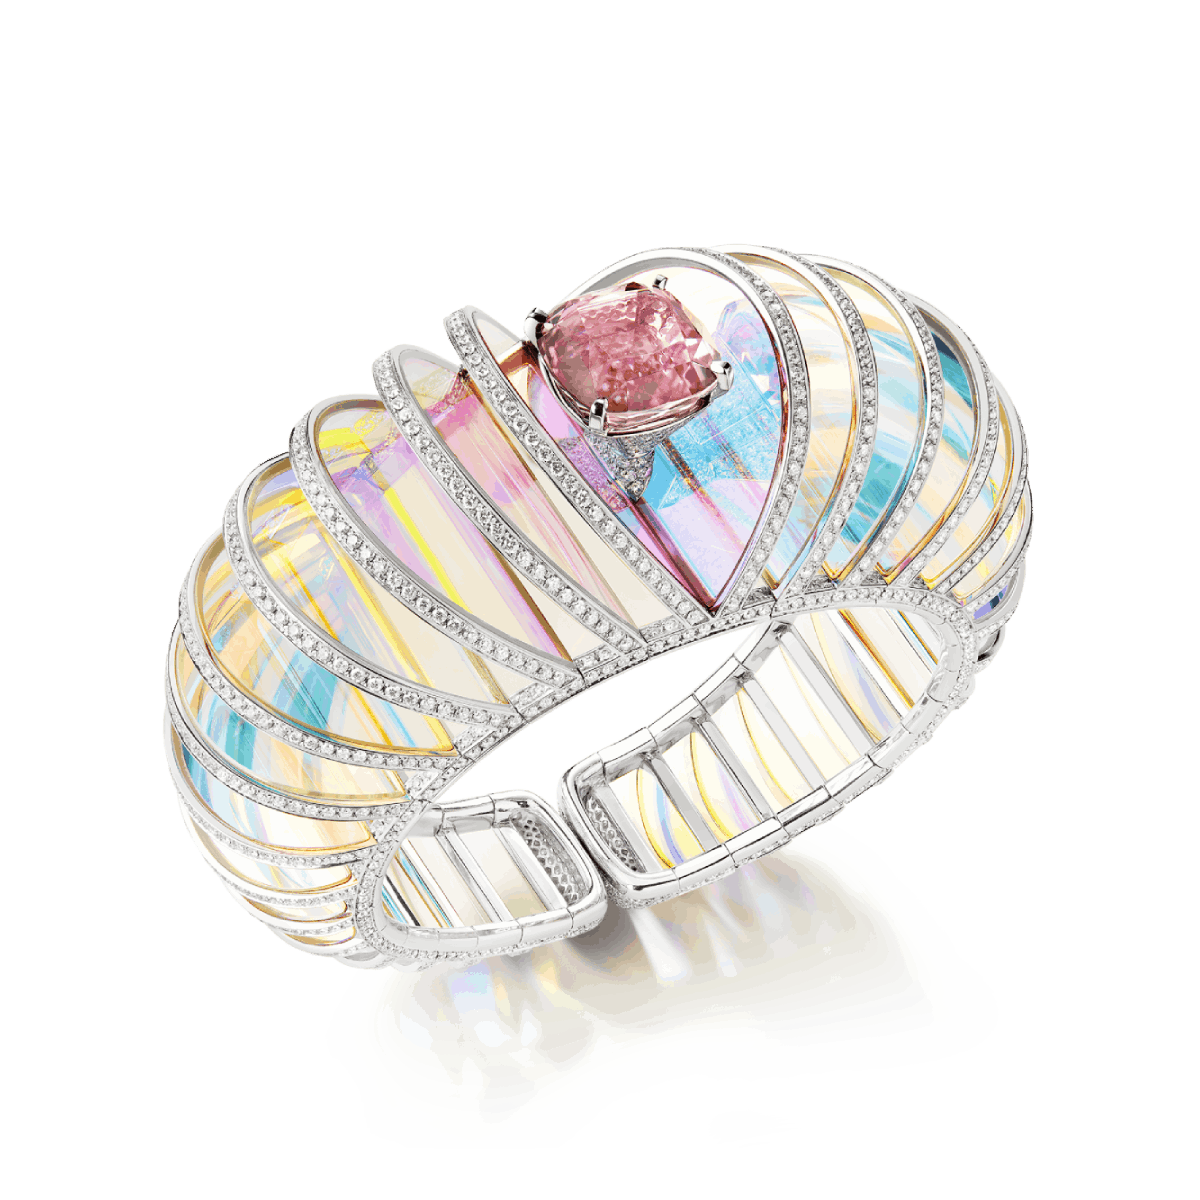 HOLOGRAPHIQUE - Bracelet set with a 14.93 ct cushion-cut pink tourmaline and holographic rock crystal, paved with diamonds, in white gold.